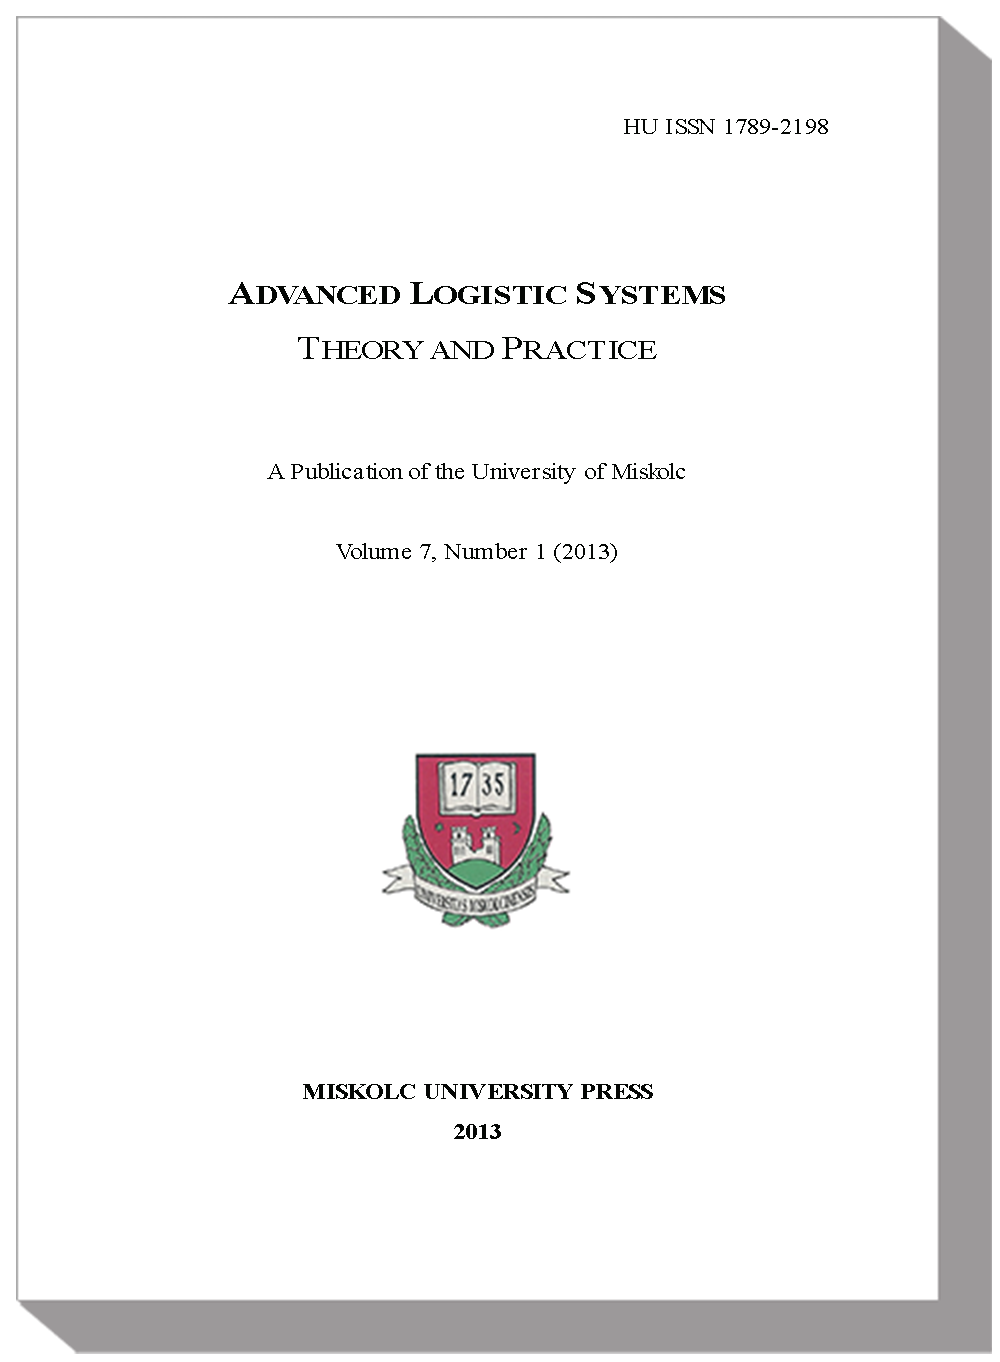 					View Vol. 7 No. 1 (2013): Advanced Logistic Systems - Theory and Practice
				